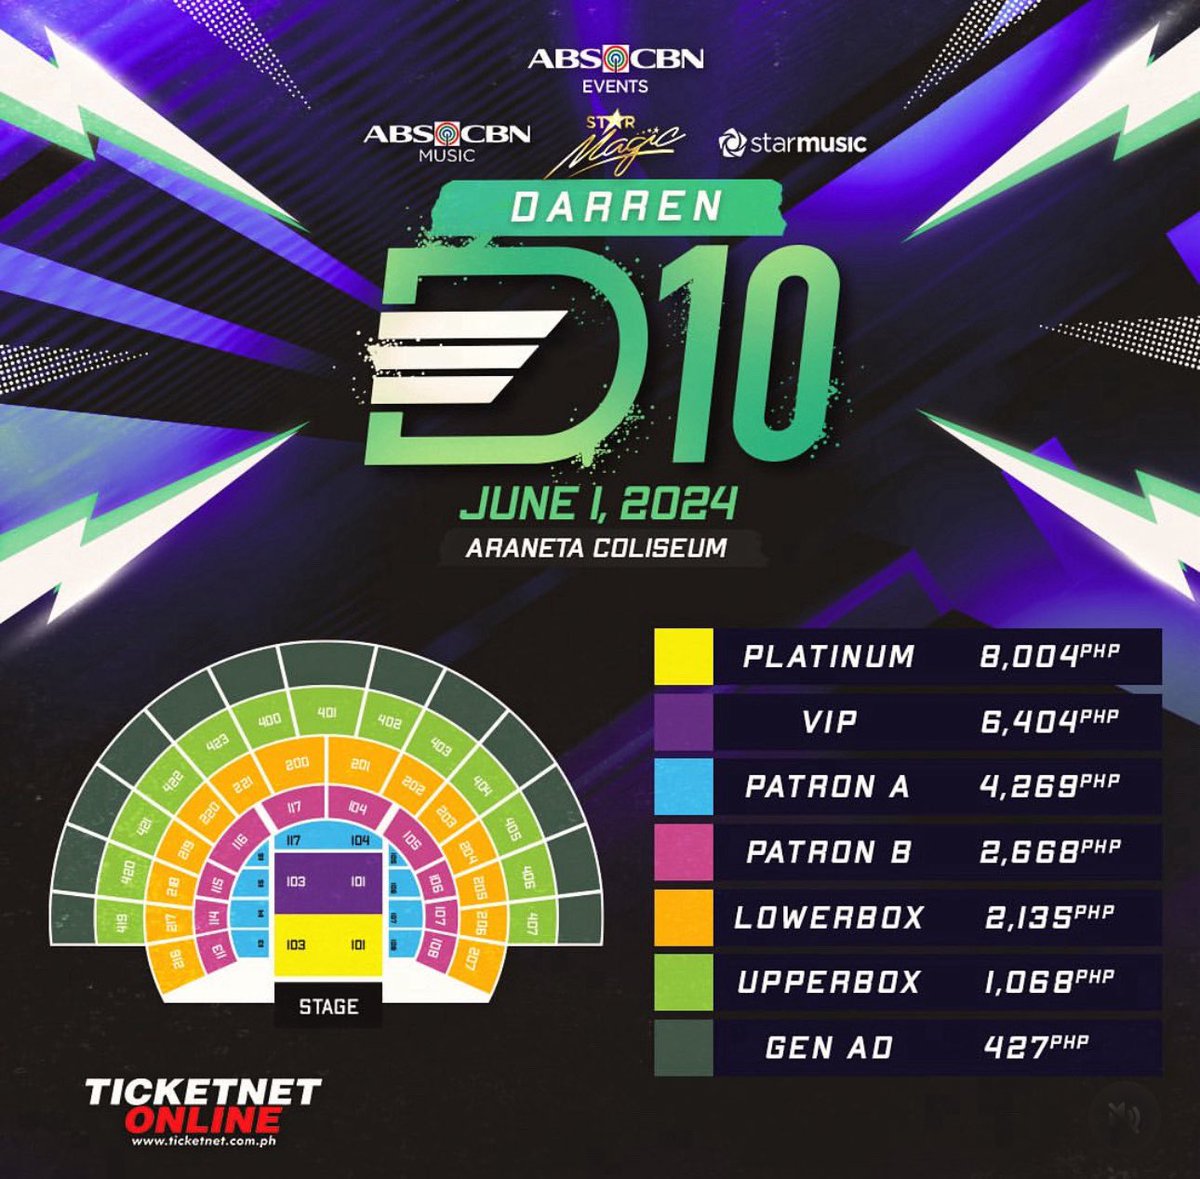 DARRENATICS, game na ba kayo? See you all at Smart Araneta Coliseum at 3:00 pm today! Don't miss the chance to see Darren and secure your seats for the 'D10 Anniversary Concert' this coming June 1! Kita kits! 💚🫰 #DARREN #D10 @Espanto2001